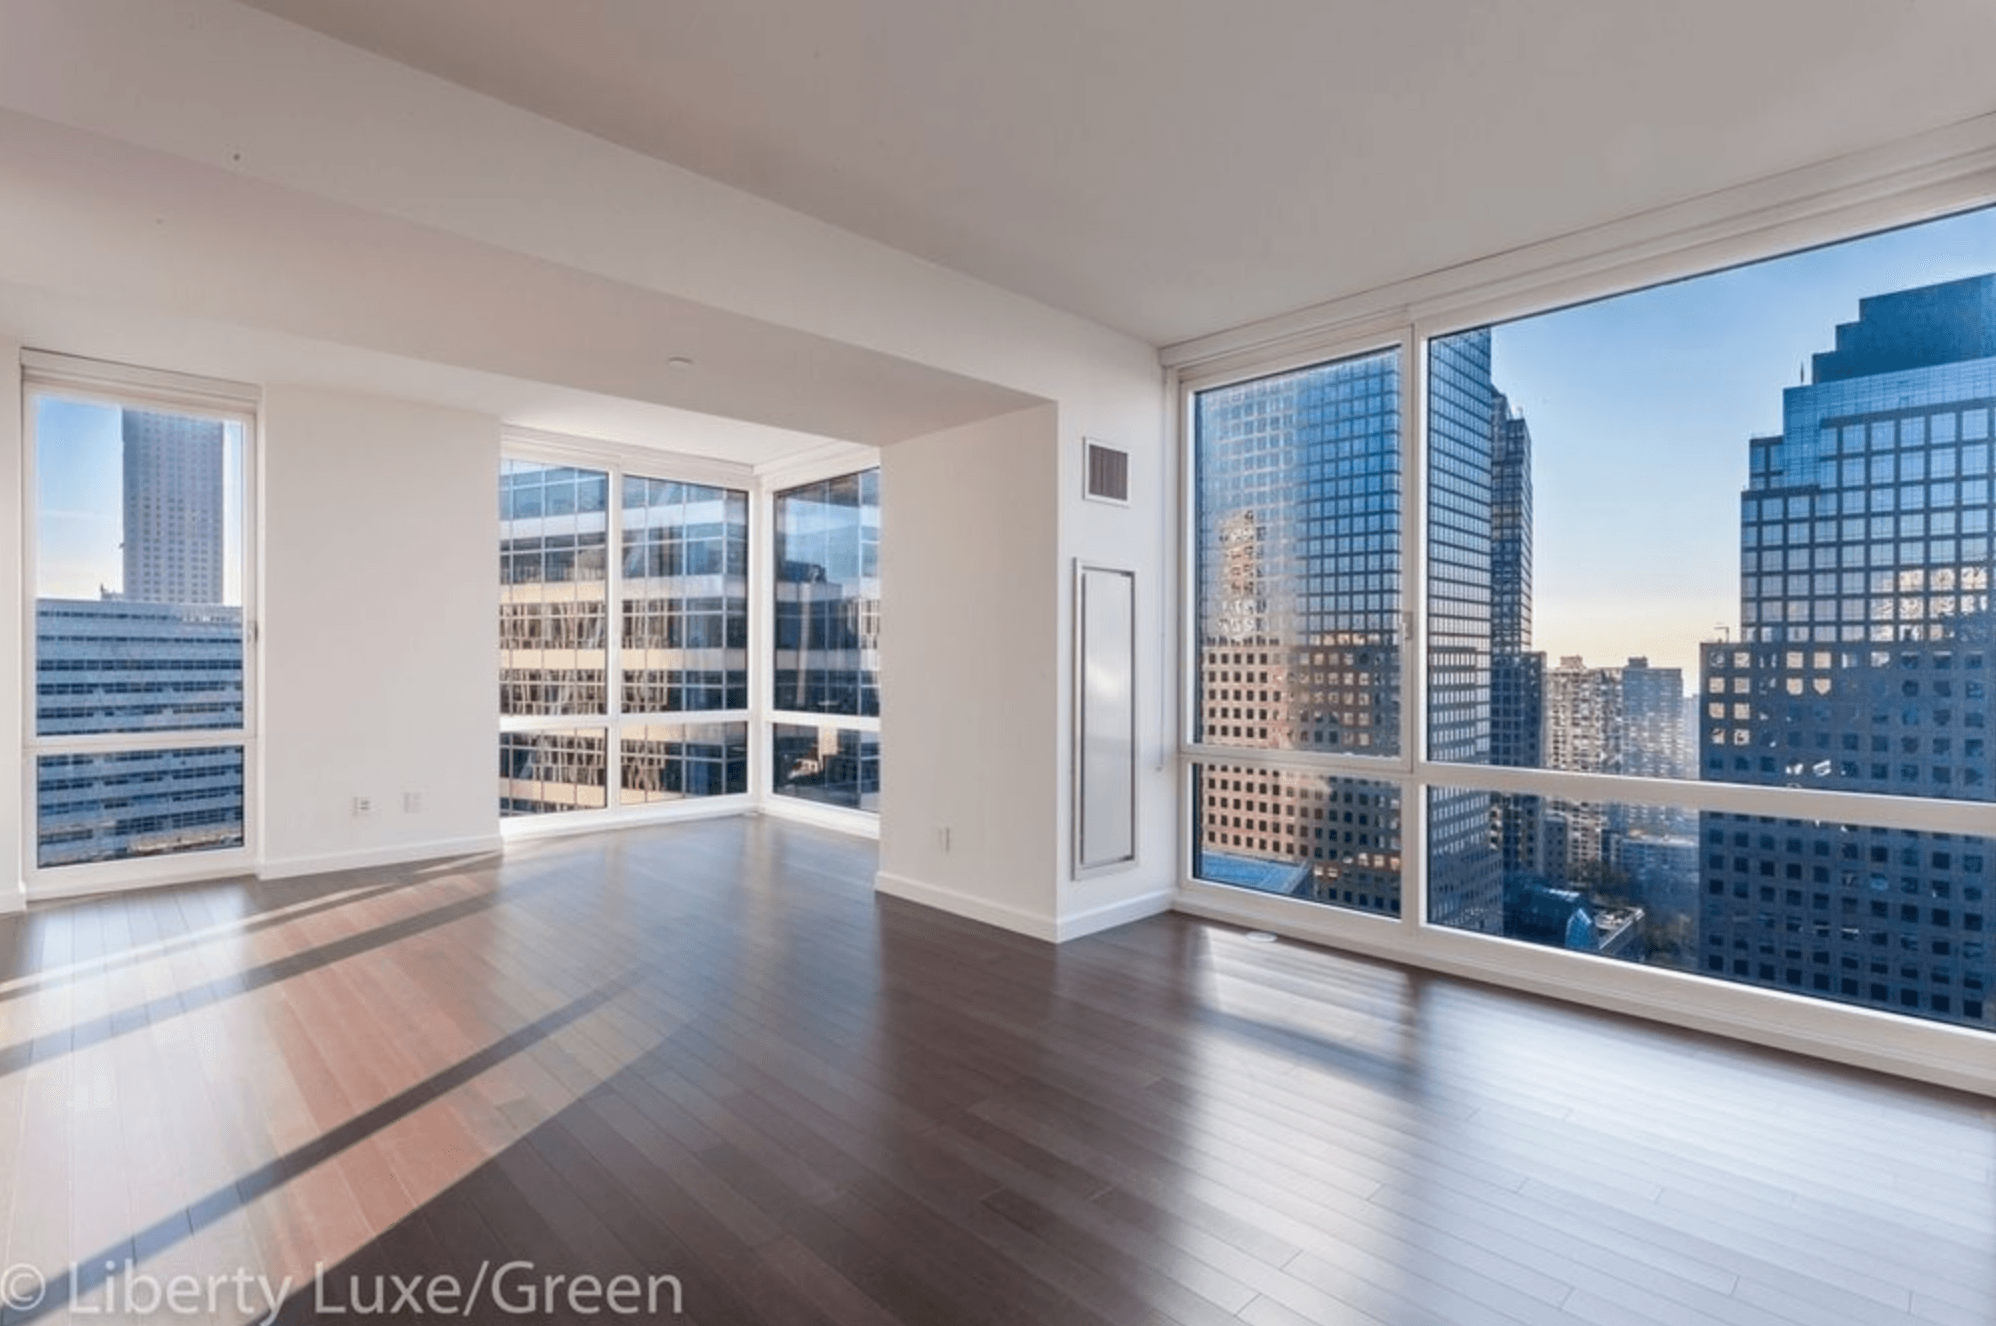 Gorgeous Penthouse Apartment in Stunning Battery Park City Hudson River Views 2b / 2b!